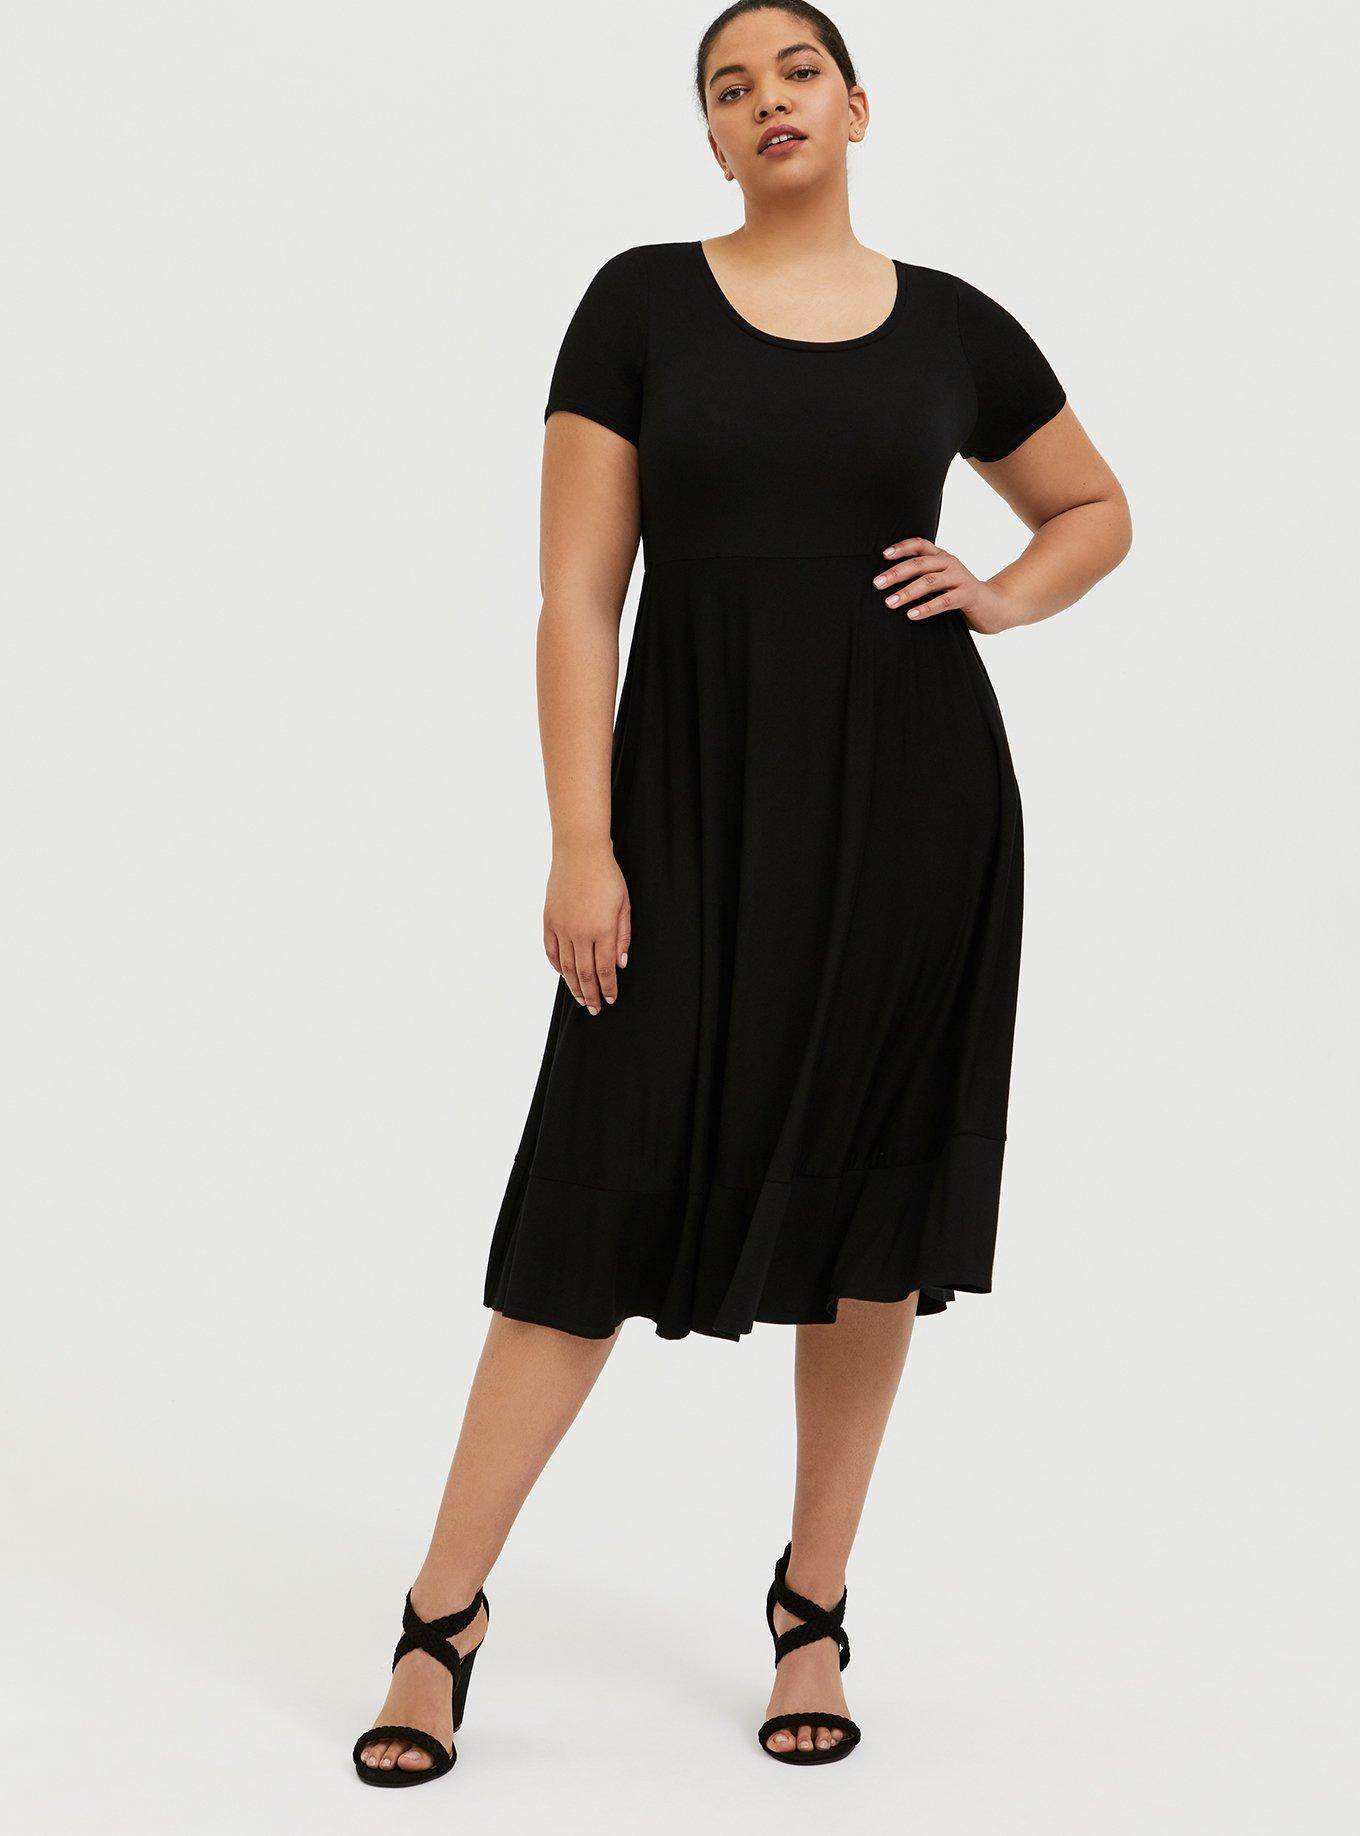 Torrid Plus Size Women's Clothing for sale in Midland, Michigan